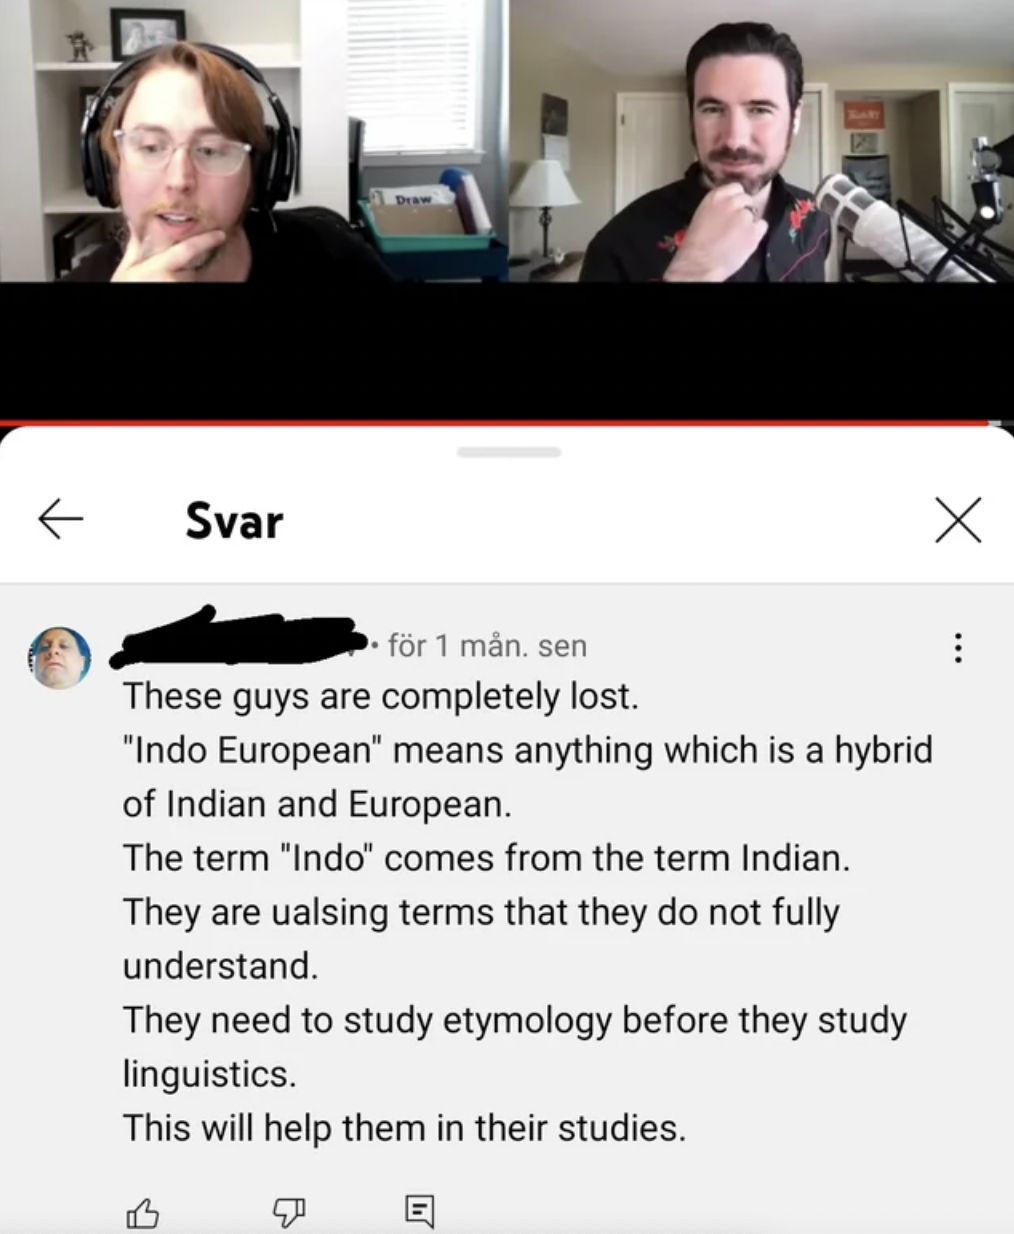 media - Svar fr 1 mn. sen These guys are completely lost. "Indo European" means anything which is a hybrid of Indian and European. The term "Indo" comes from the term Indian. They are ualsing terms that they do not fully understand. They need to study ety